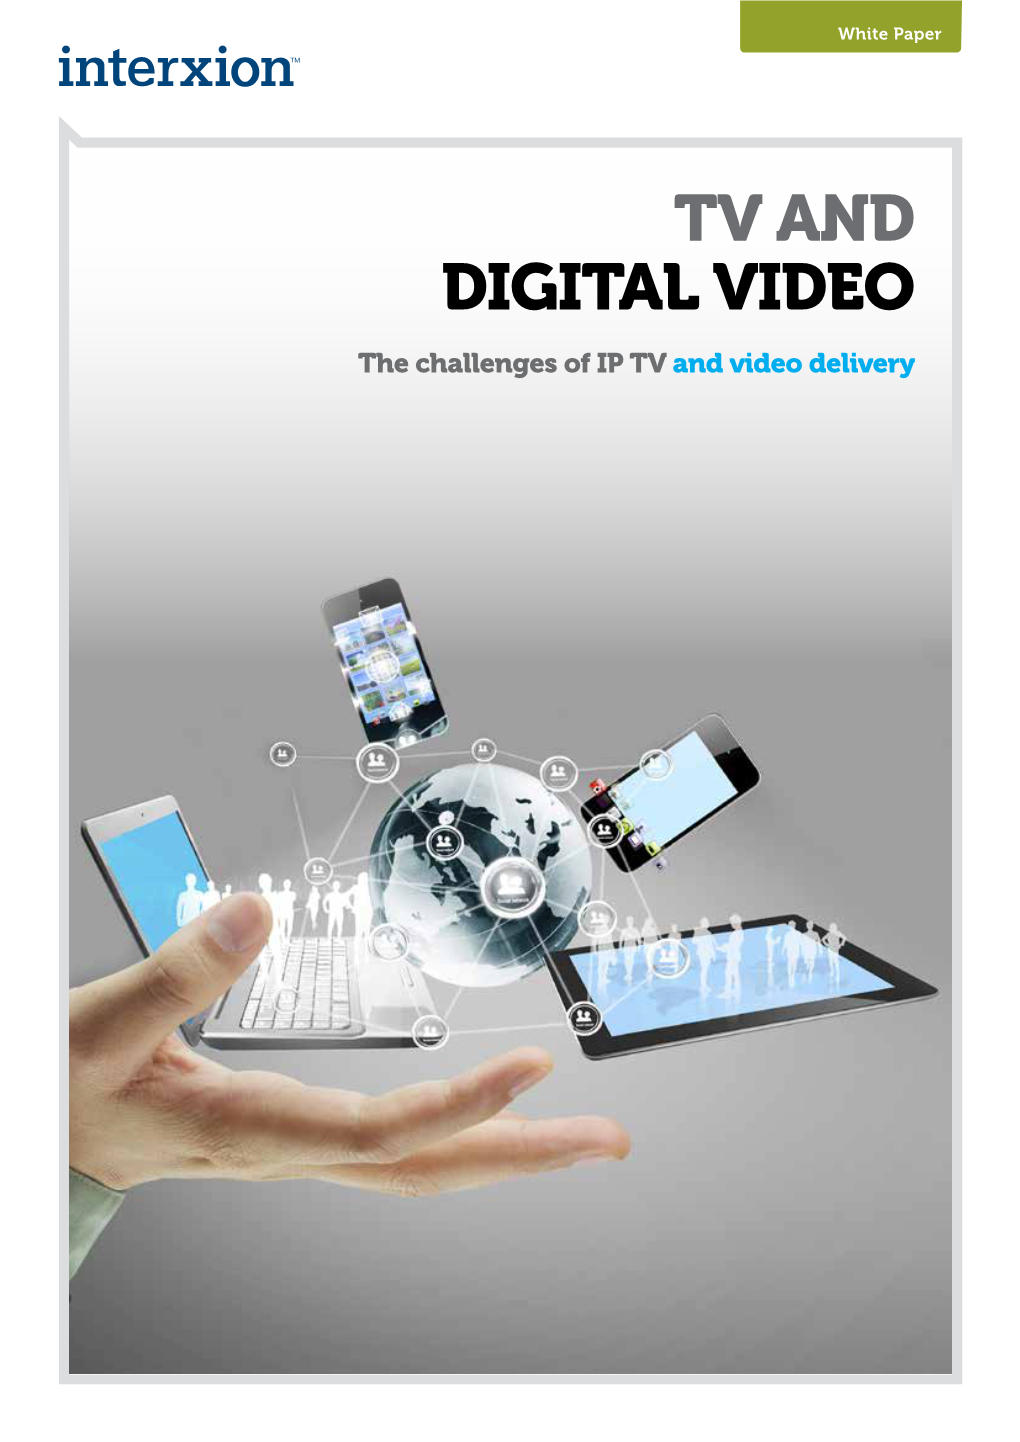 TV and DIGITAL VIDEO the Challenges of IP TV and Video Delivery